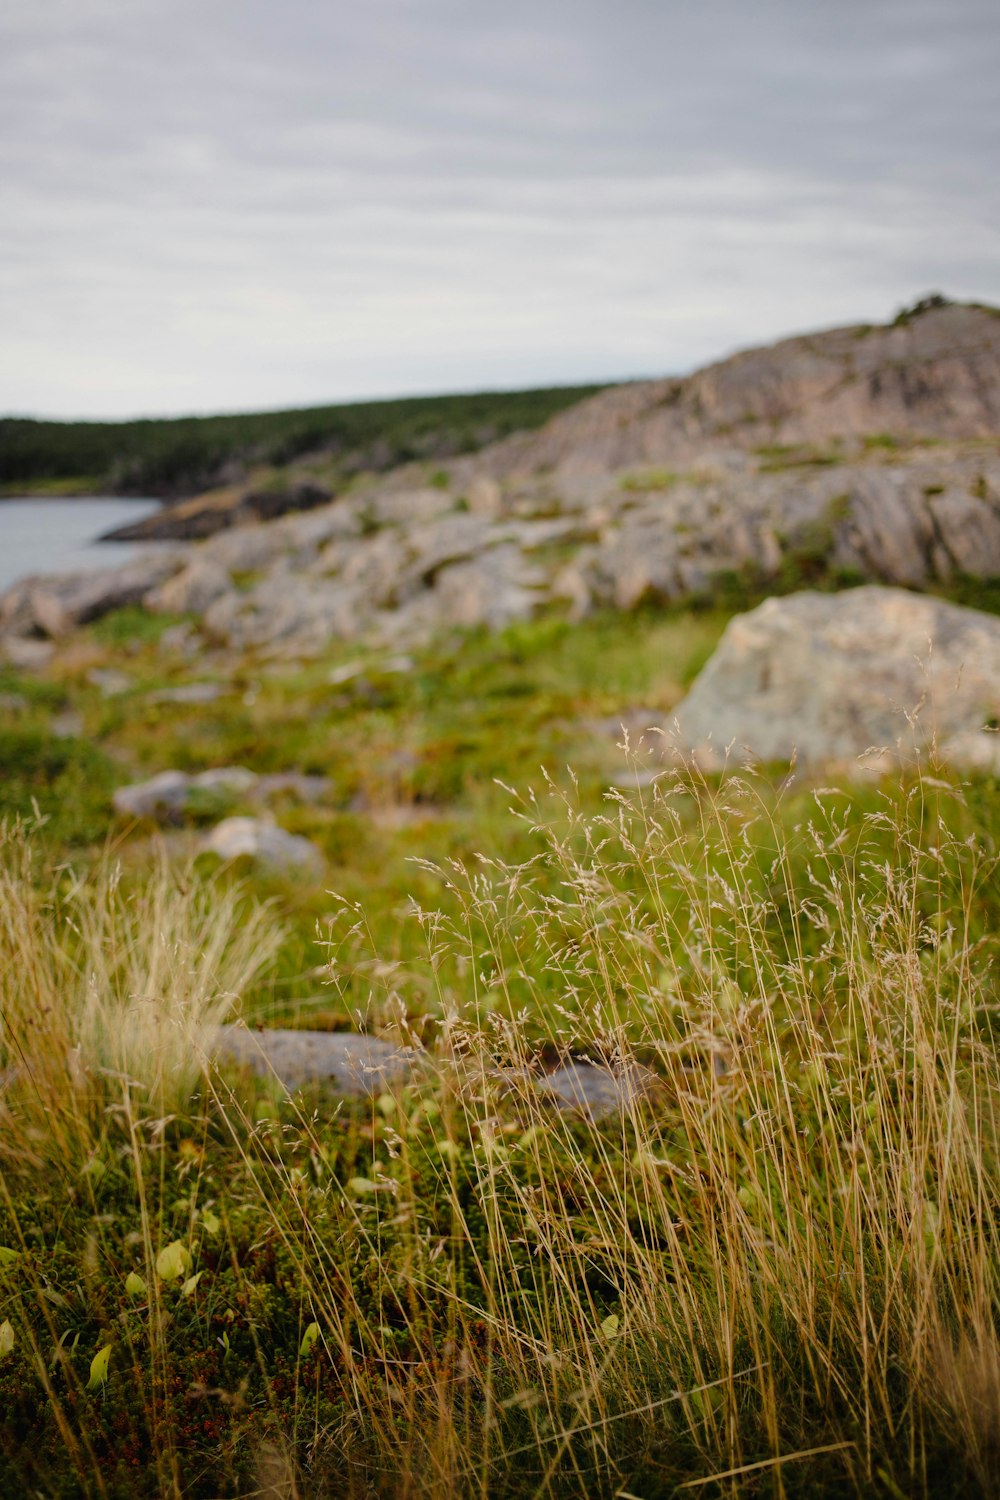 a grassy field with rocks and water in the background